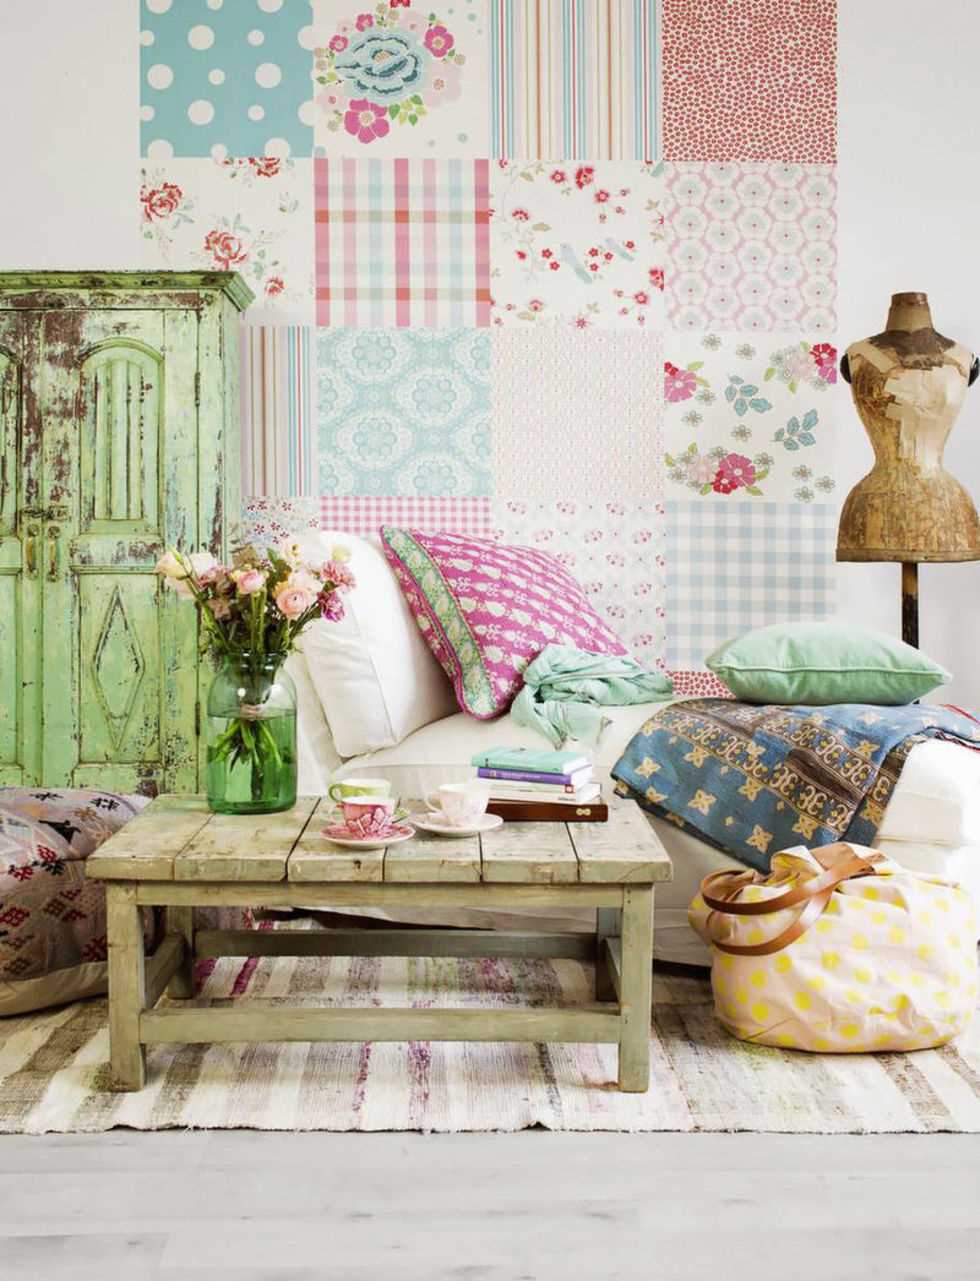 version of the bright decor of the dining room in the style of patchwork